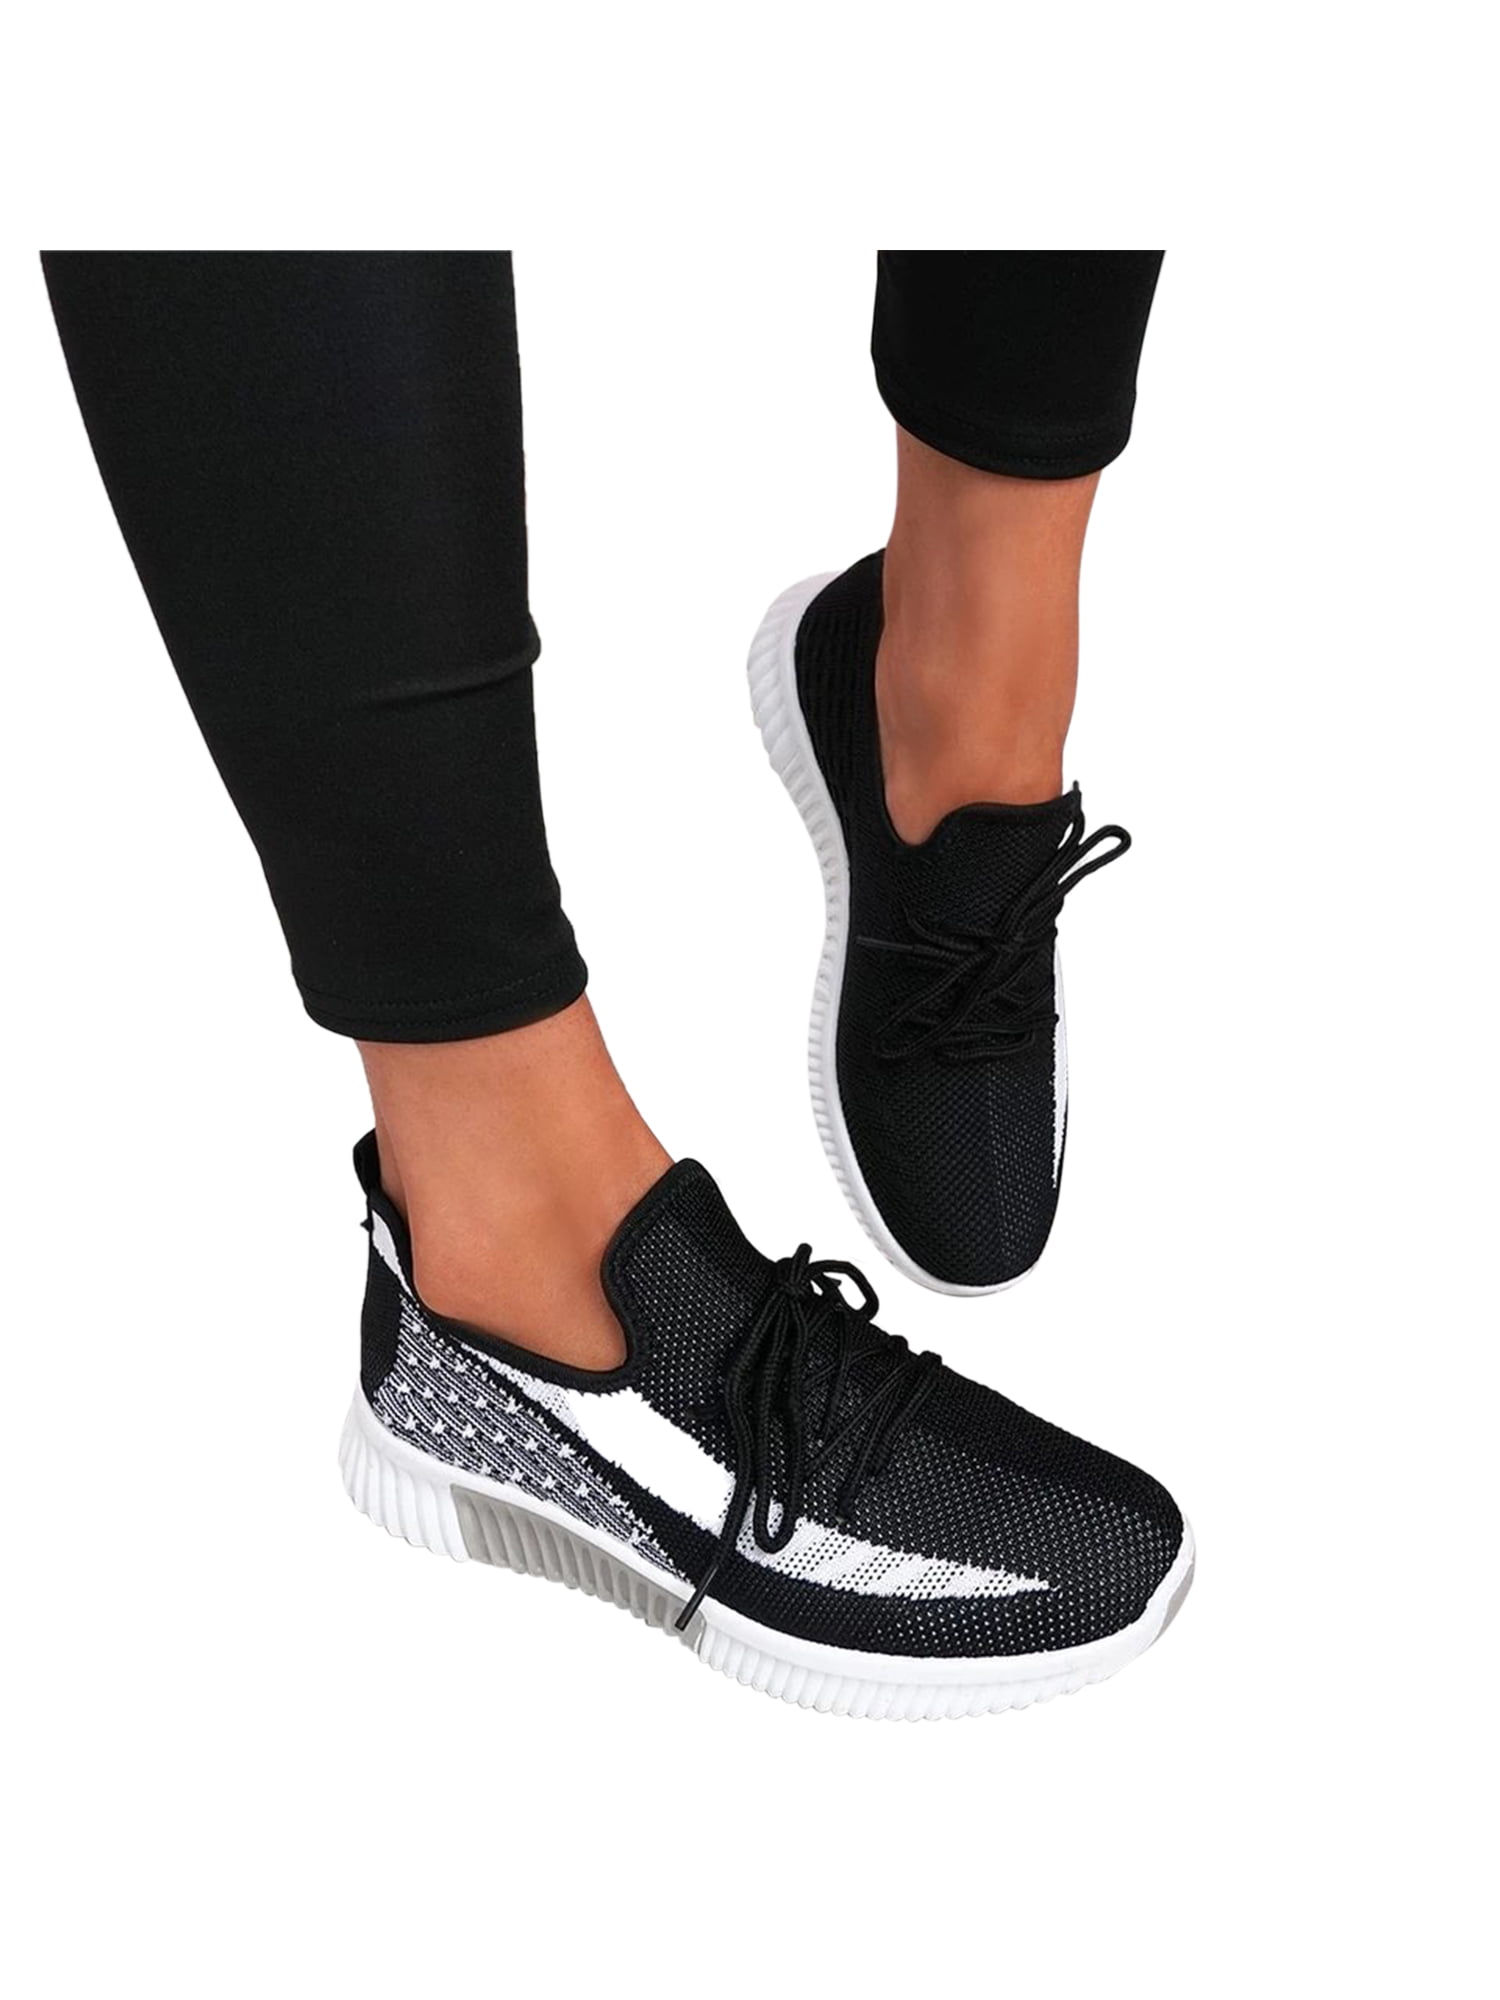 Details about   Womens Running Jogging Sports Shoes Breathable Mesh Sneakers Gym Tennis Comfy B 